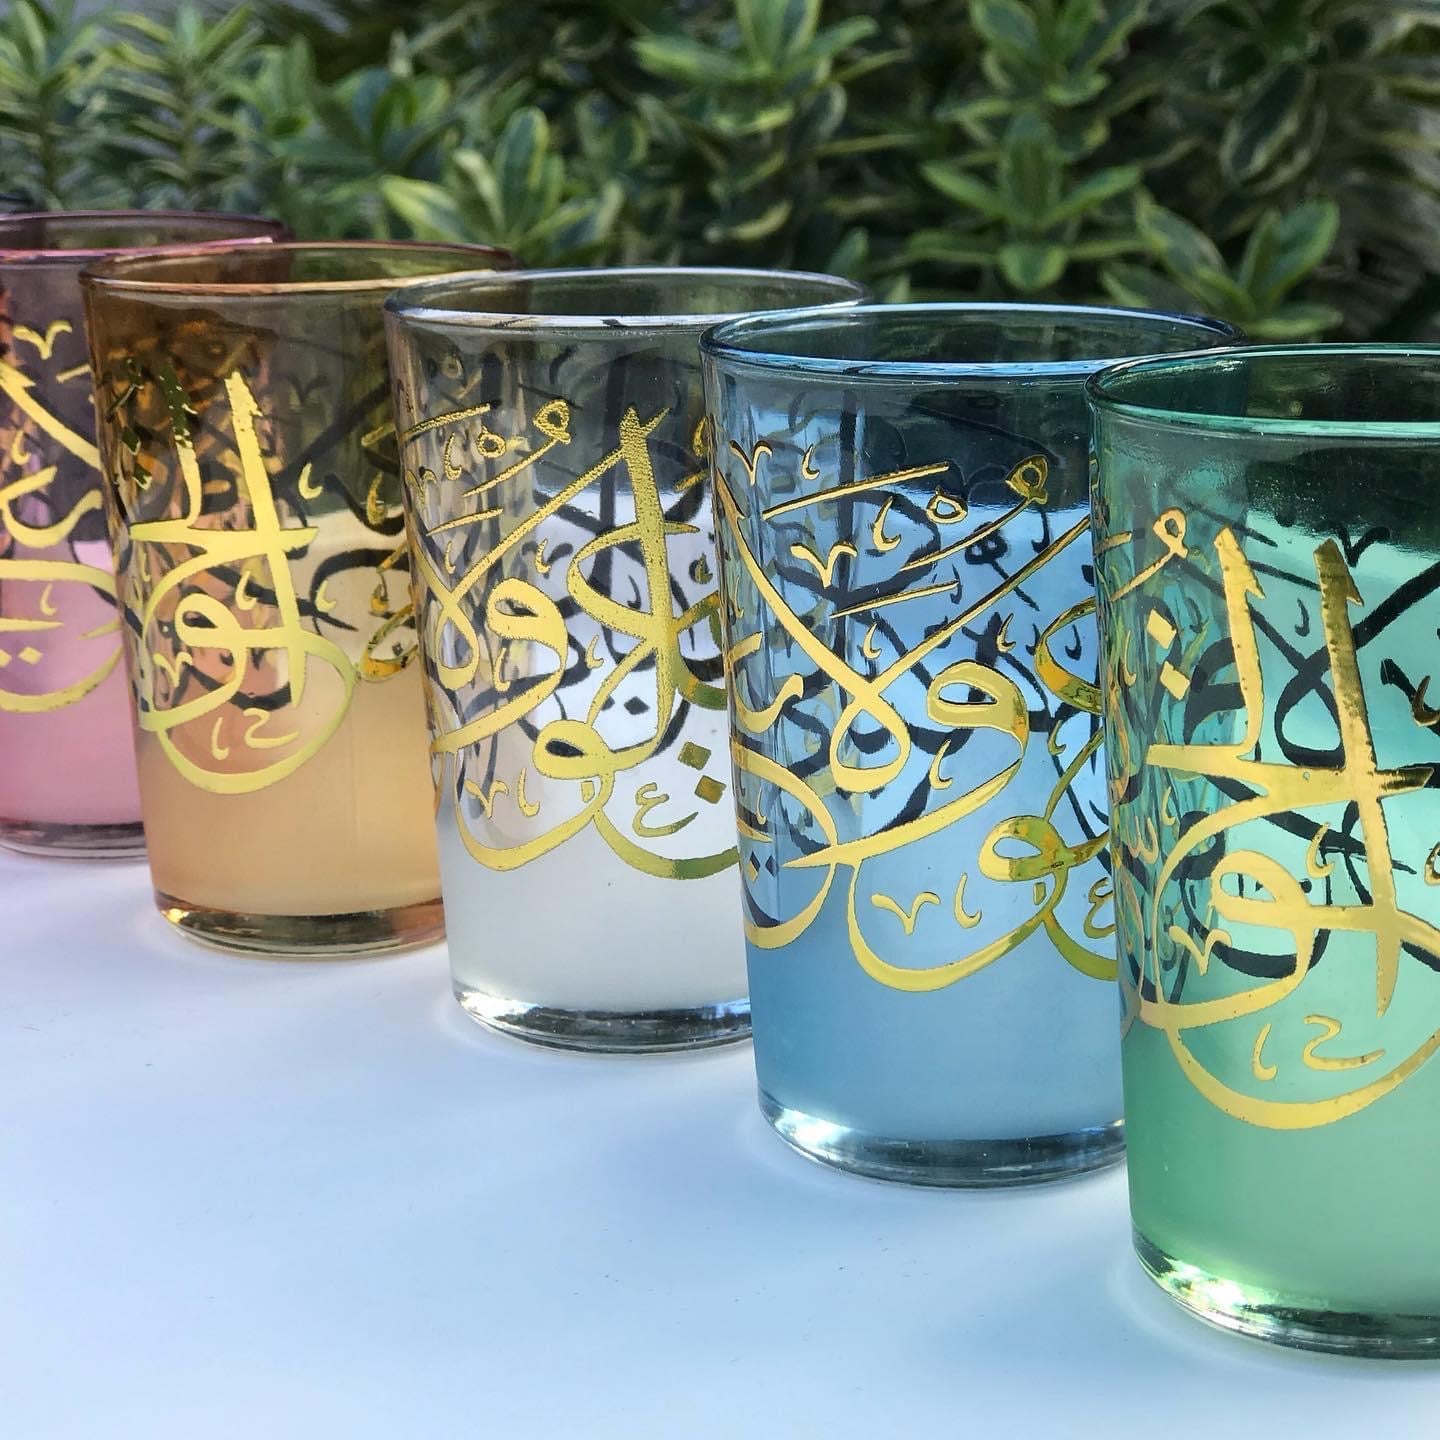 Arabesque Moroccan Tea Glasses, Moroccan Drinking Glasses – Pack Of 6 – Unique and Stylish – Handmade Traditional Glass Set – For Tea, Coffee, Juice, Water, Etc. - Marrakesh Gardens